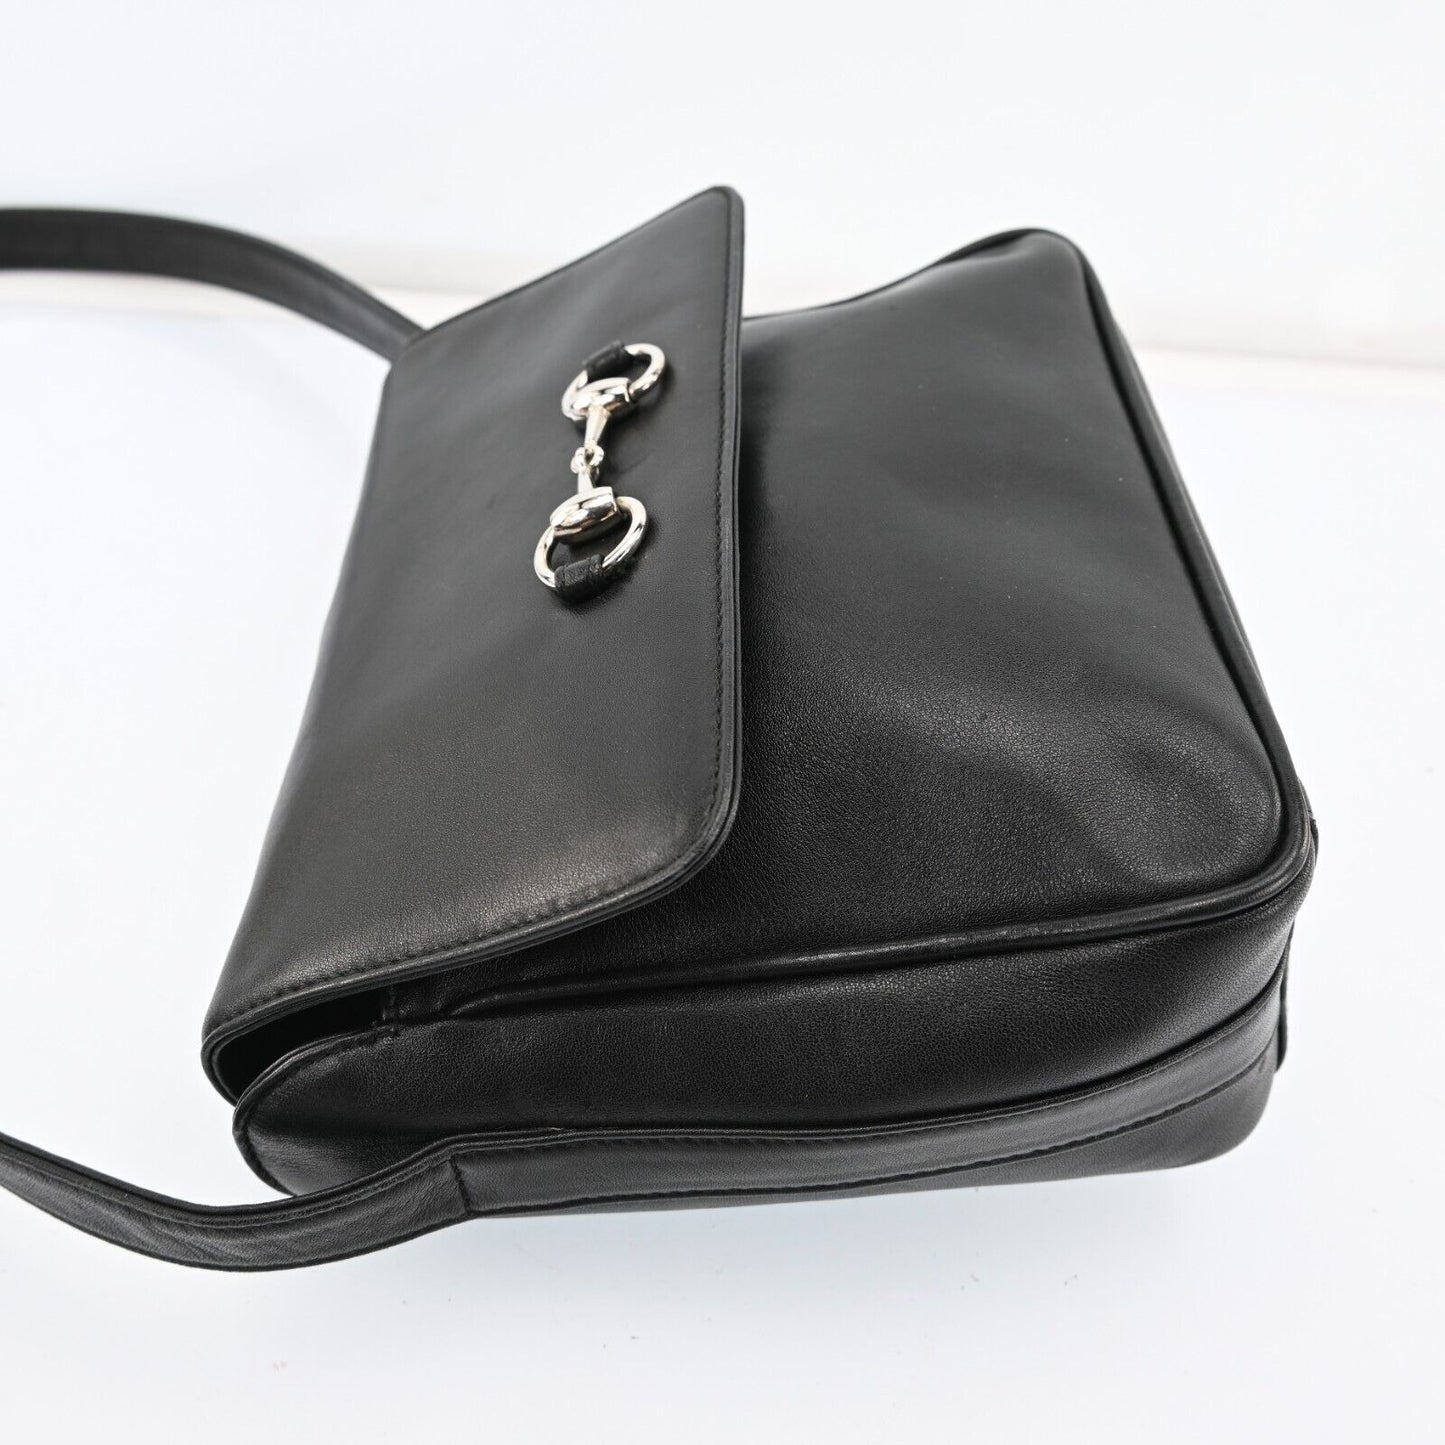 Gucci black leather 1955 Horse-bit cross body with a chrome accent